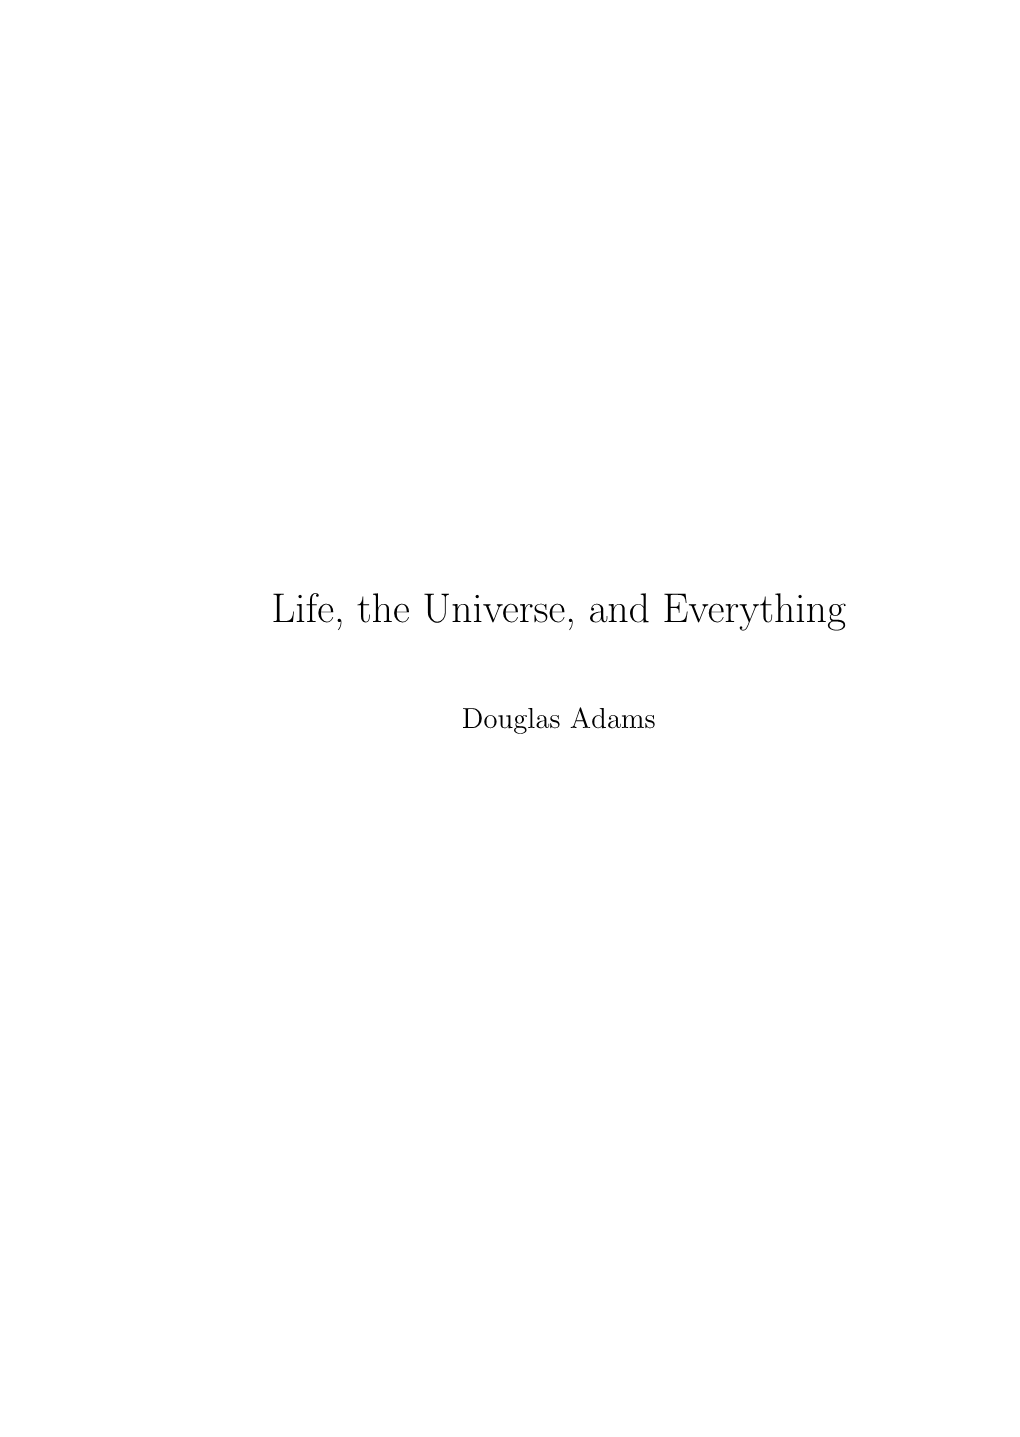 Life Universe and Everything.Pdf